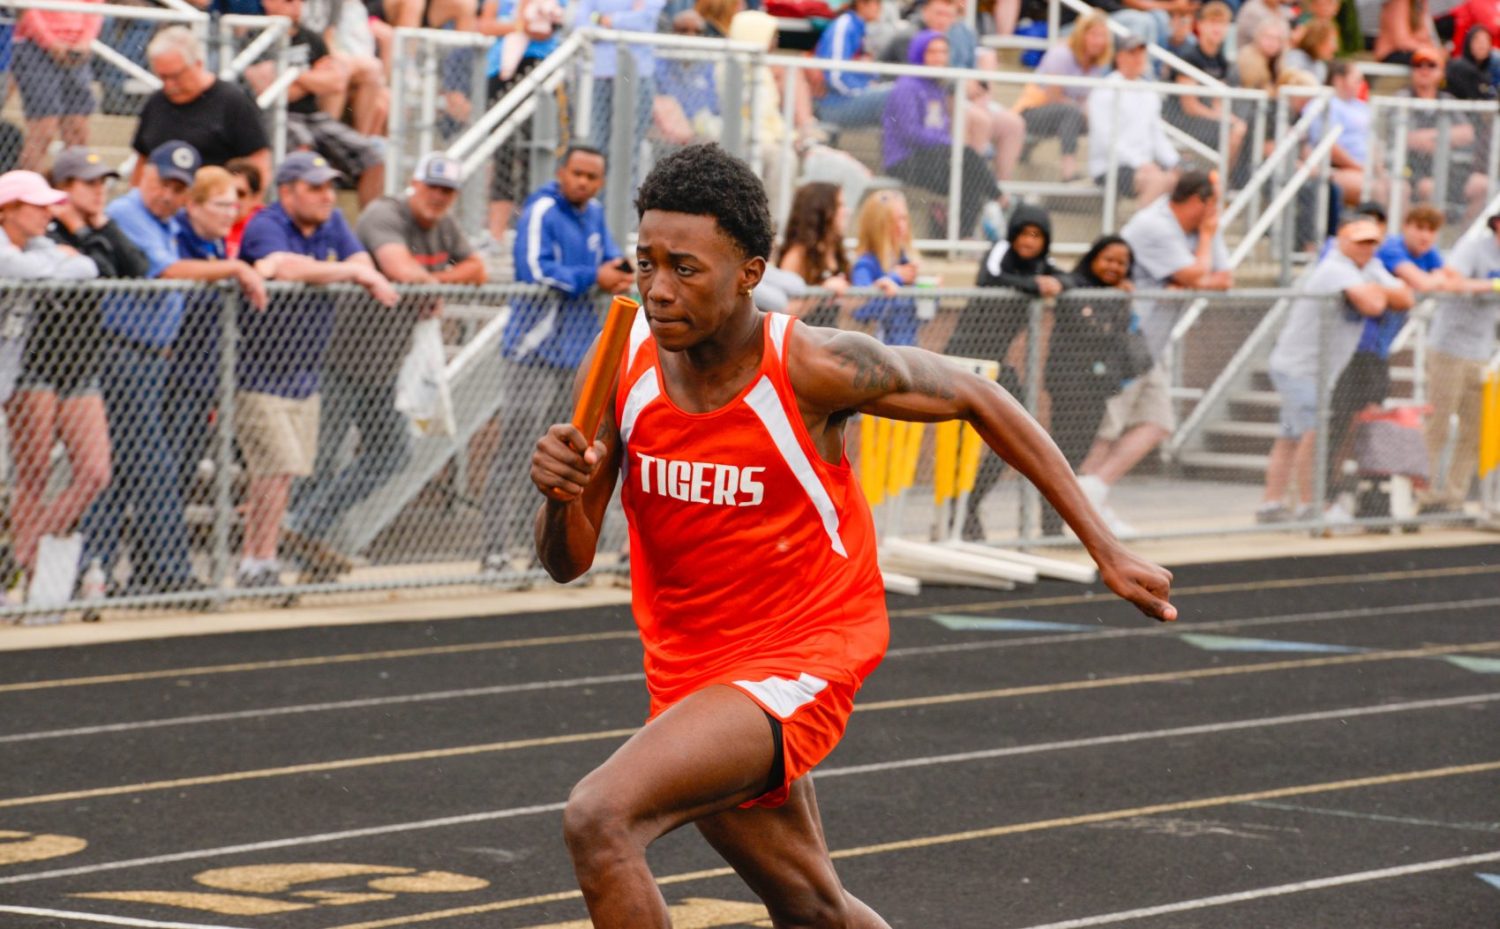 Muskegon Heights relay team earns All-State honors with second-place finishes in 400 and 800 at Division 4 track state finals